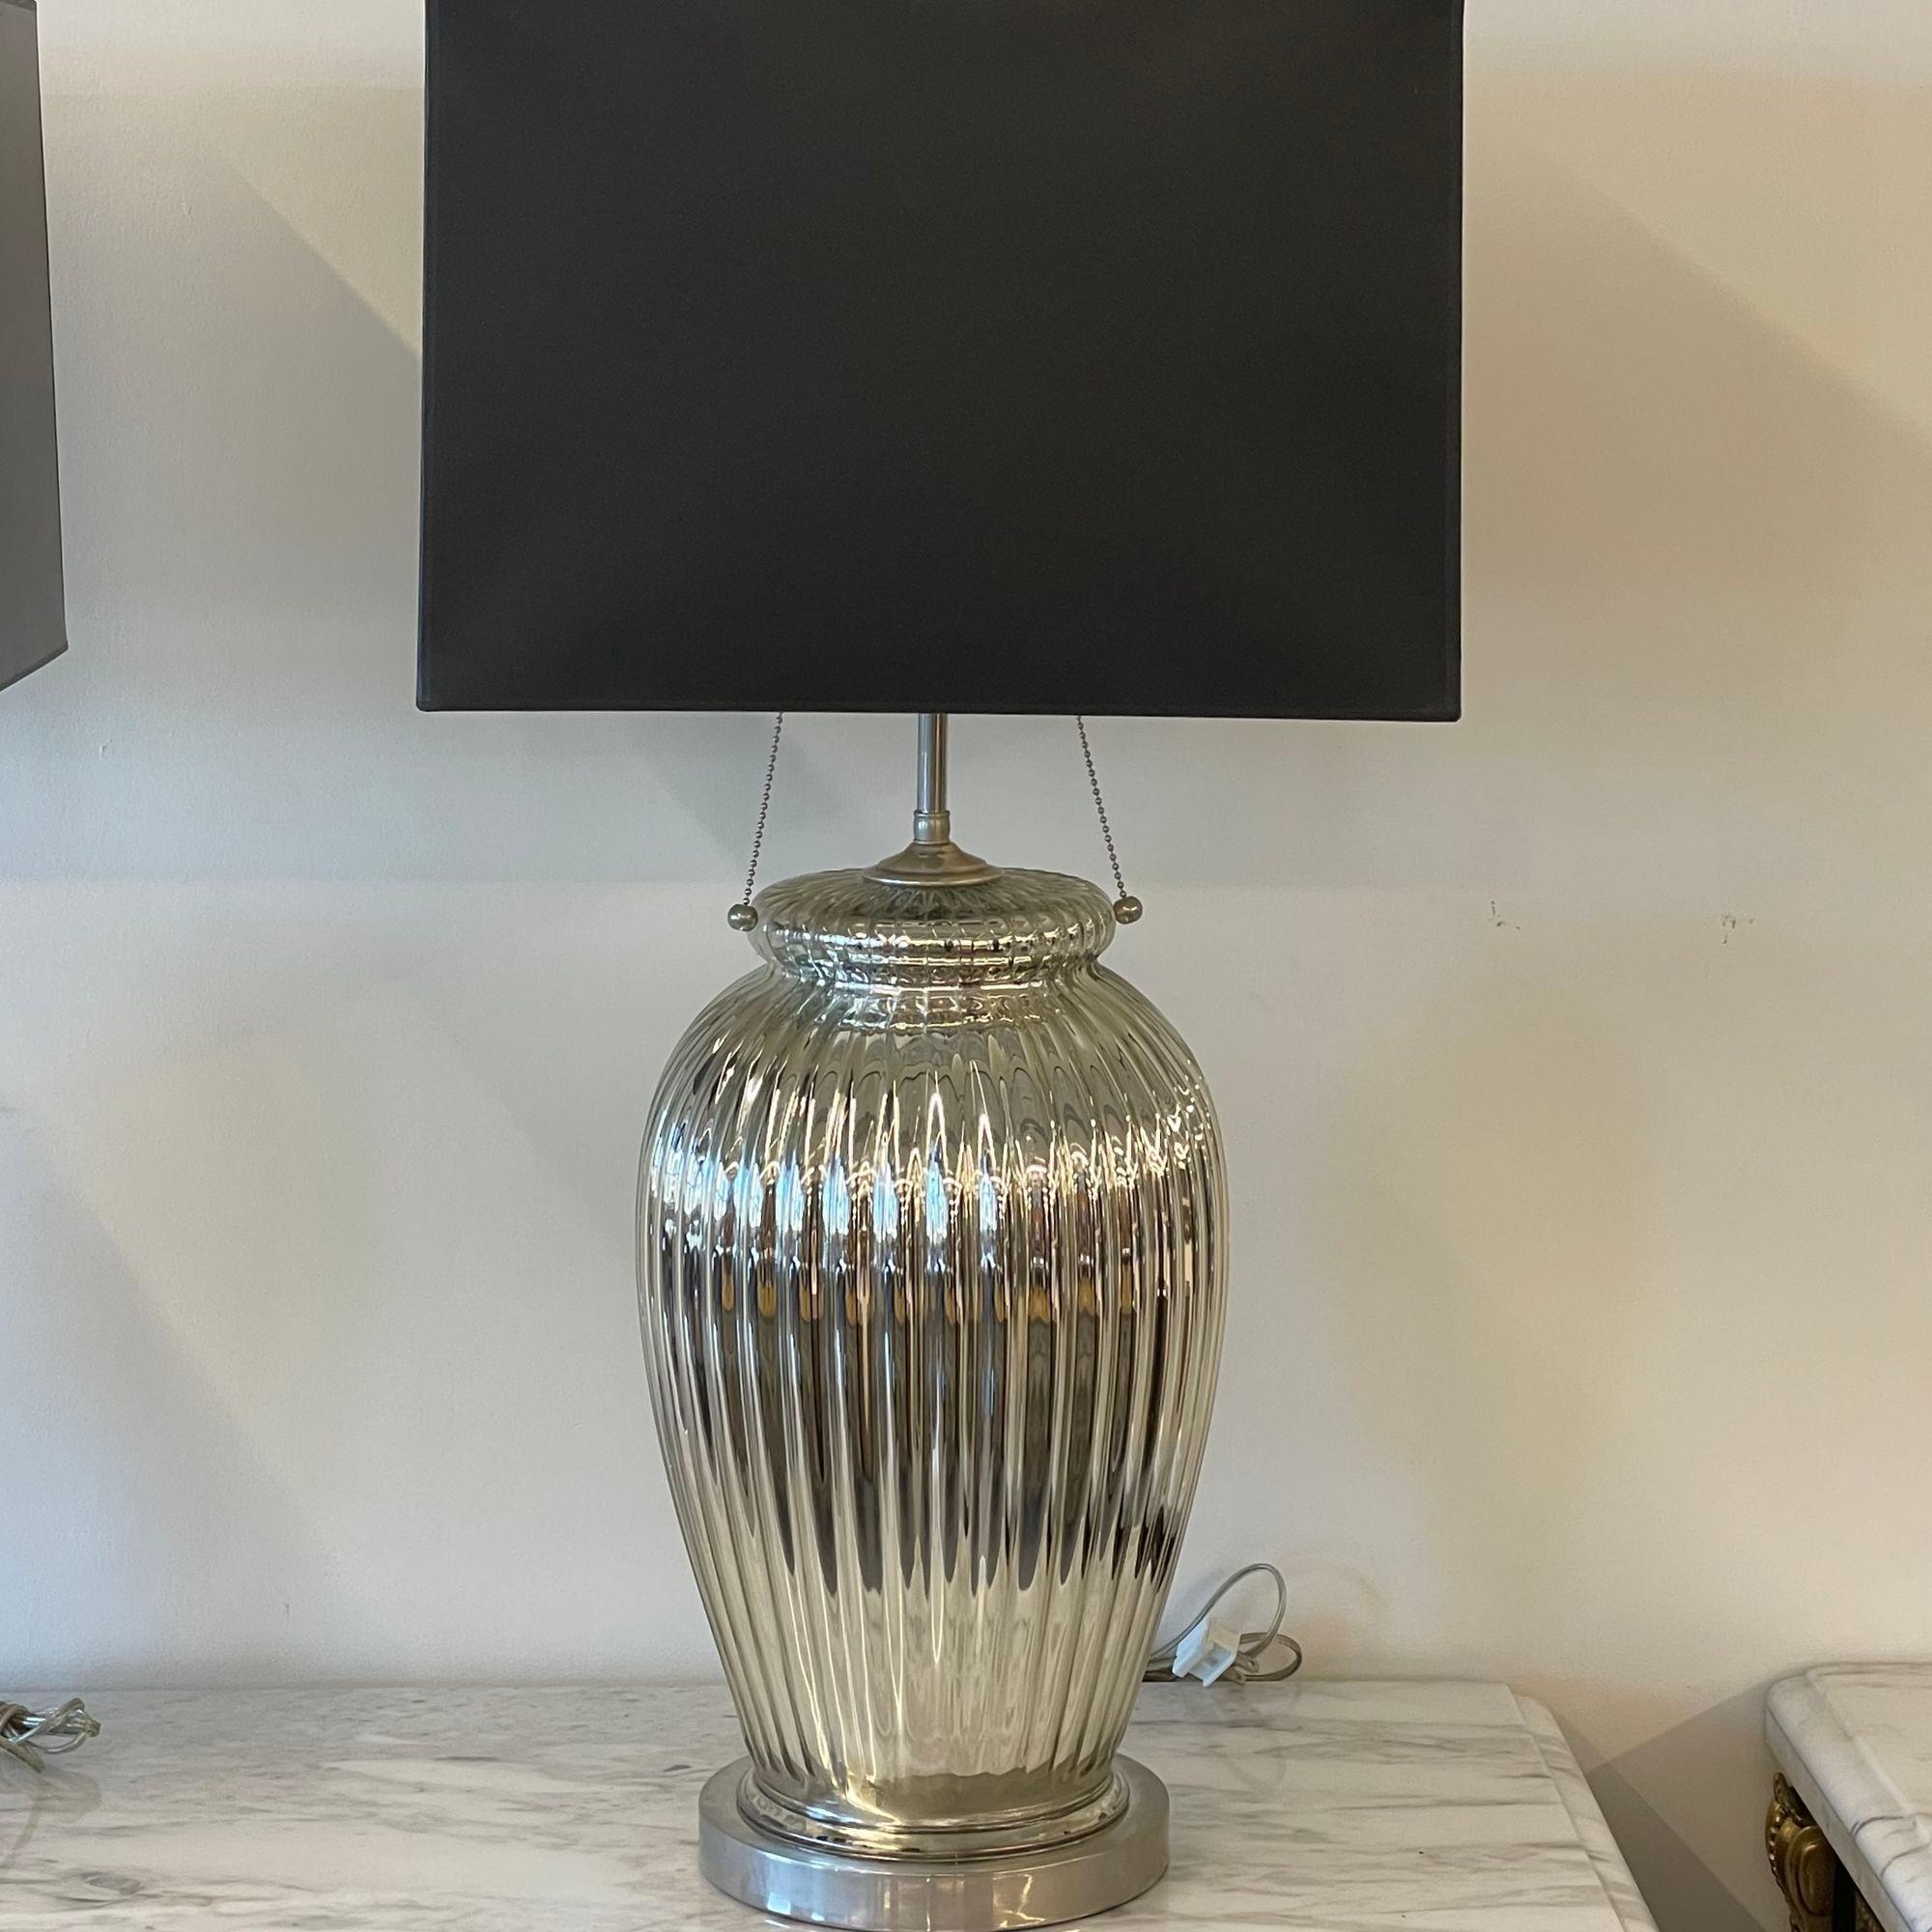 Pair of Mid-Century Modern Silver Table Lamps, Mercury Glass, Brass, Urn-Shaped In Good Condition For Sale In Stamford, CT